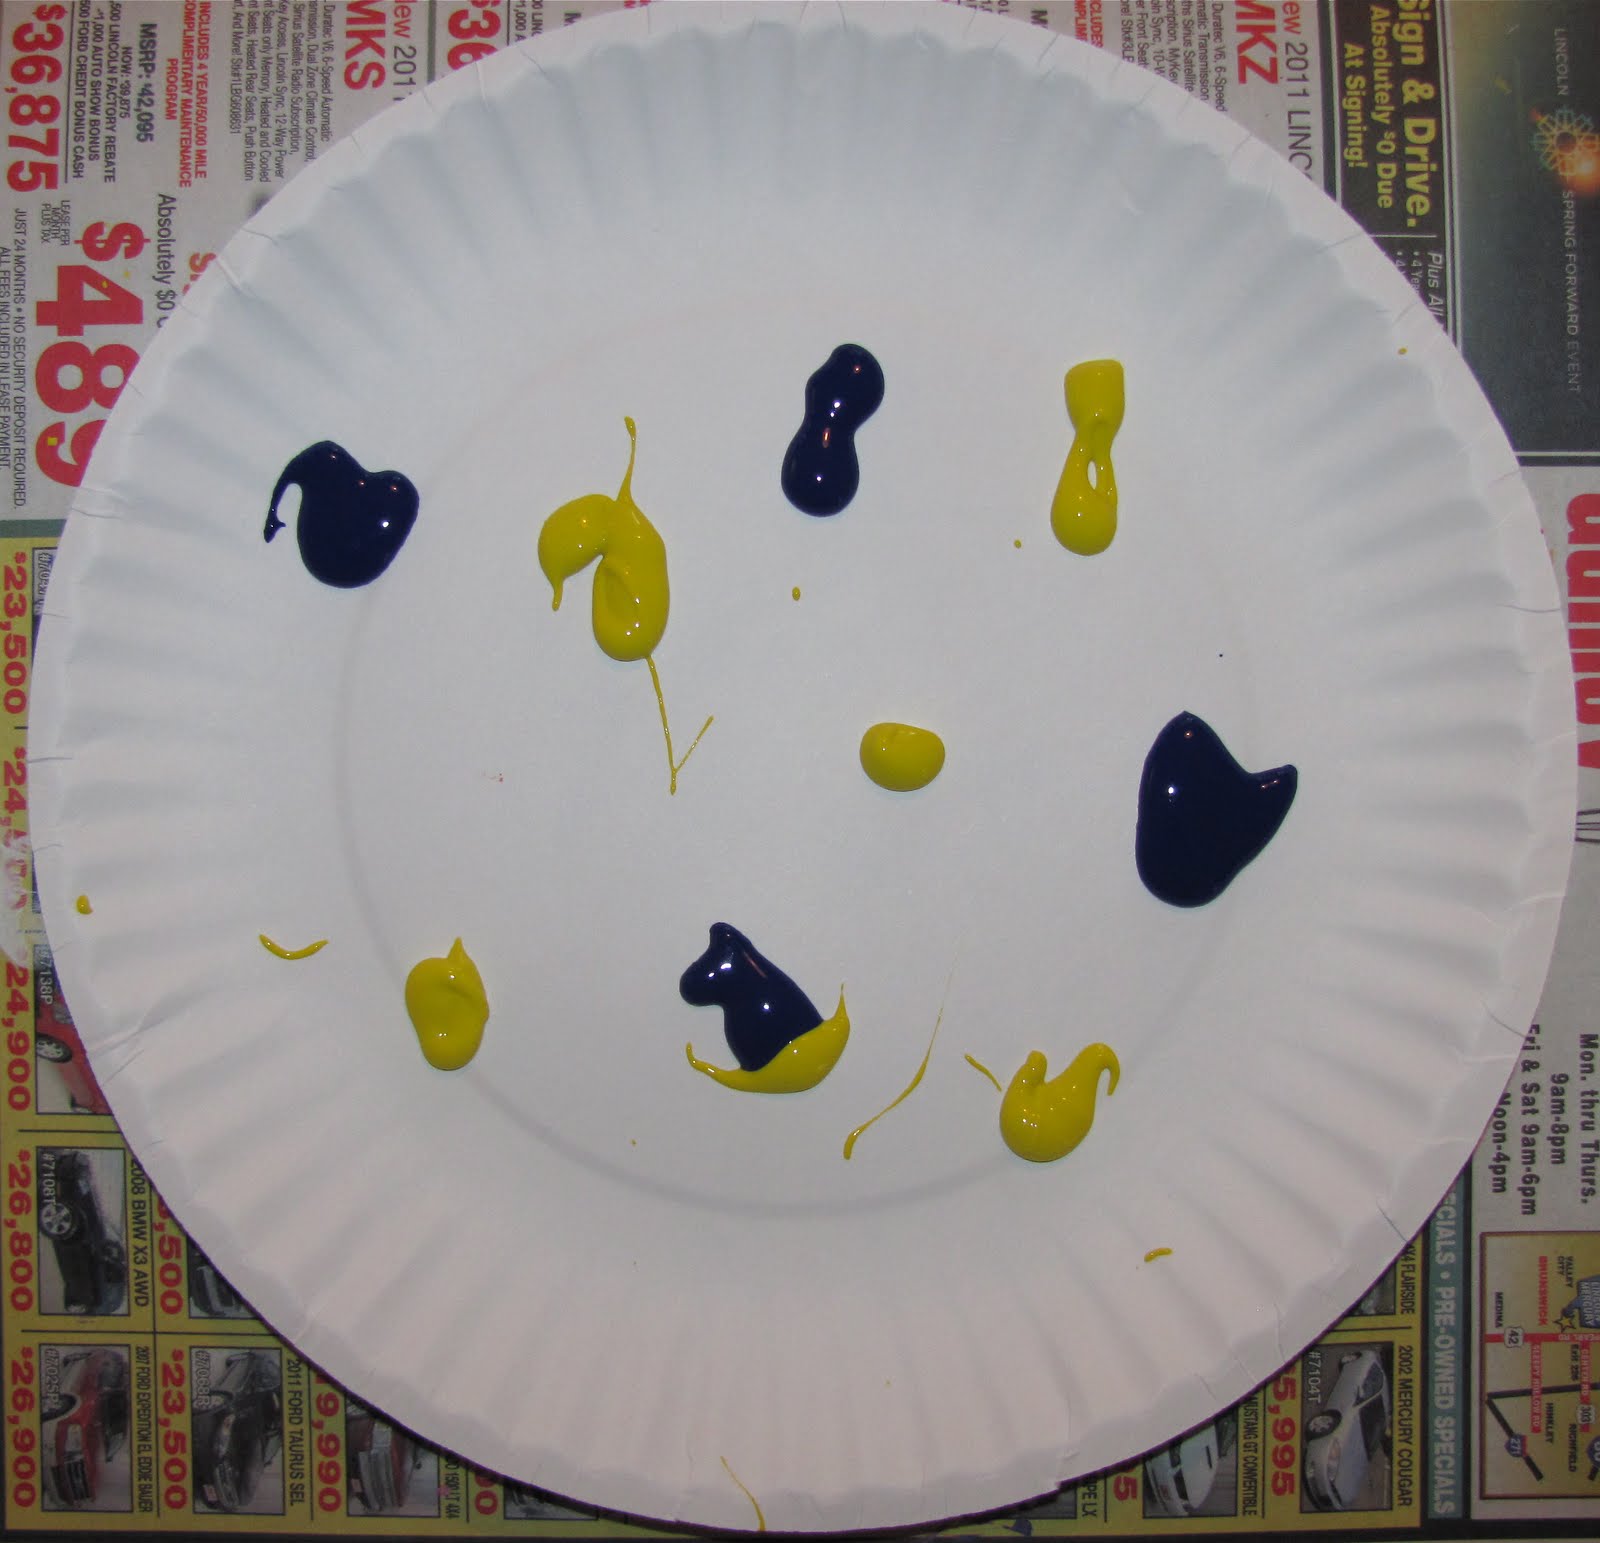 Painting and Drawing Paper Plate Craft - TinkerLab  Paper plate crafts,  Plate crafts, Paper plate art